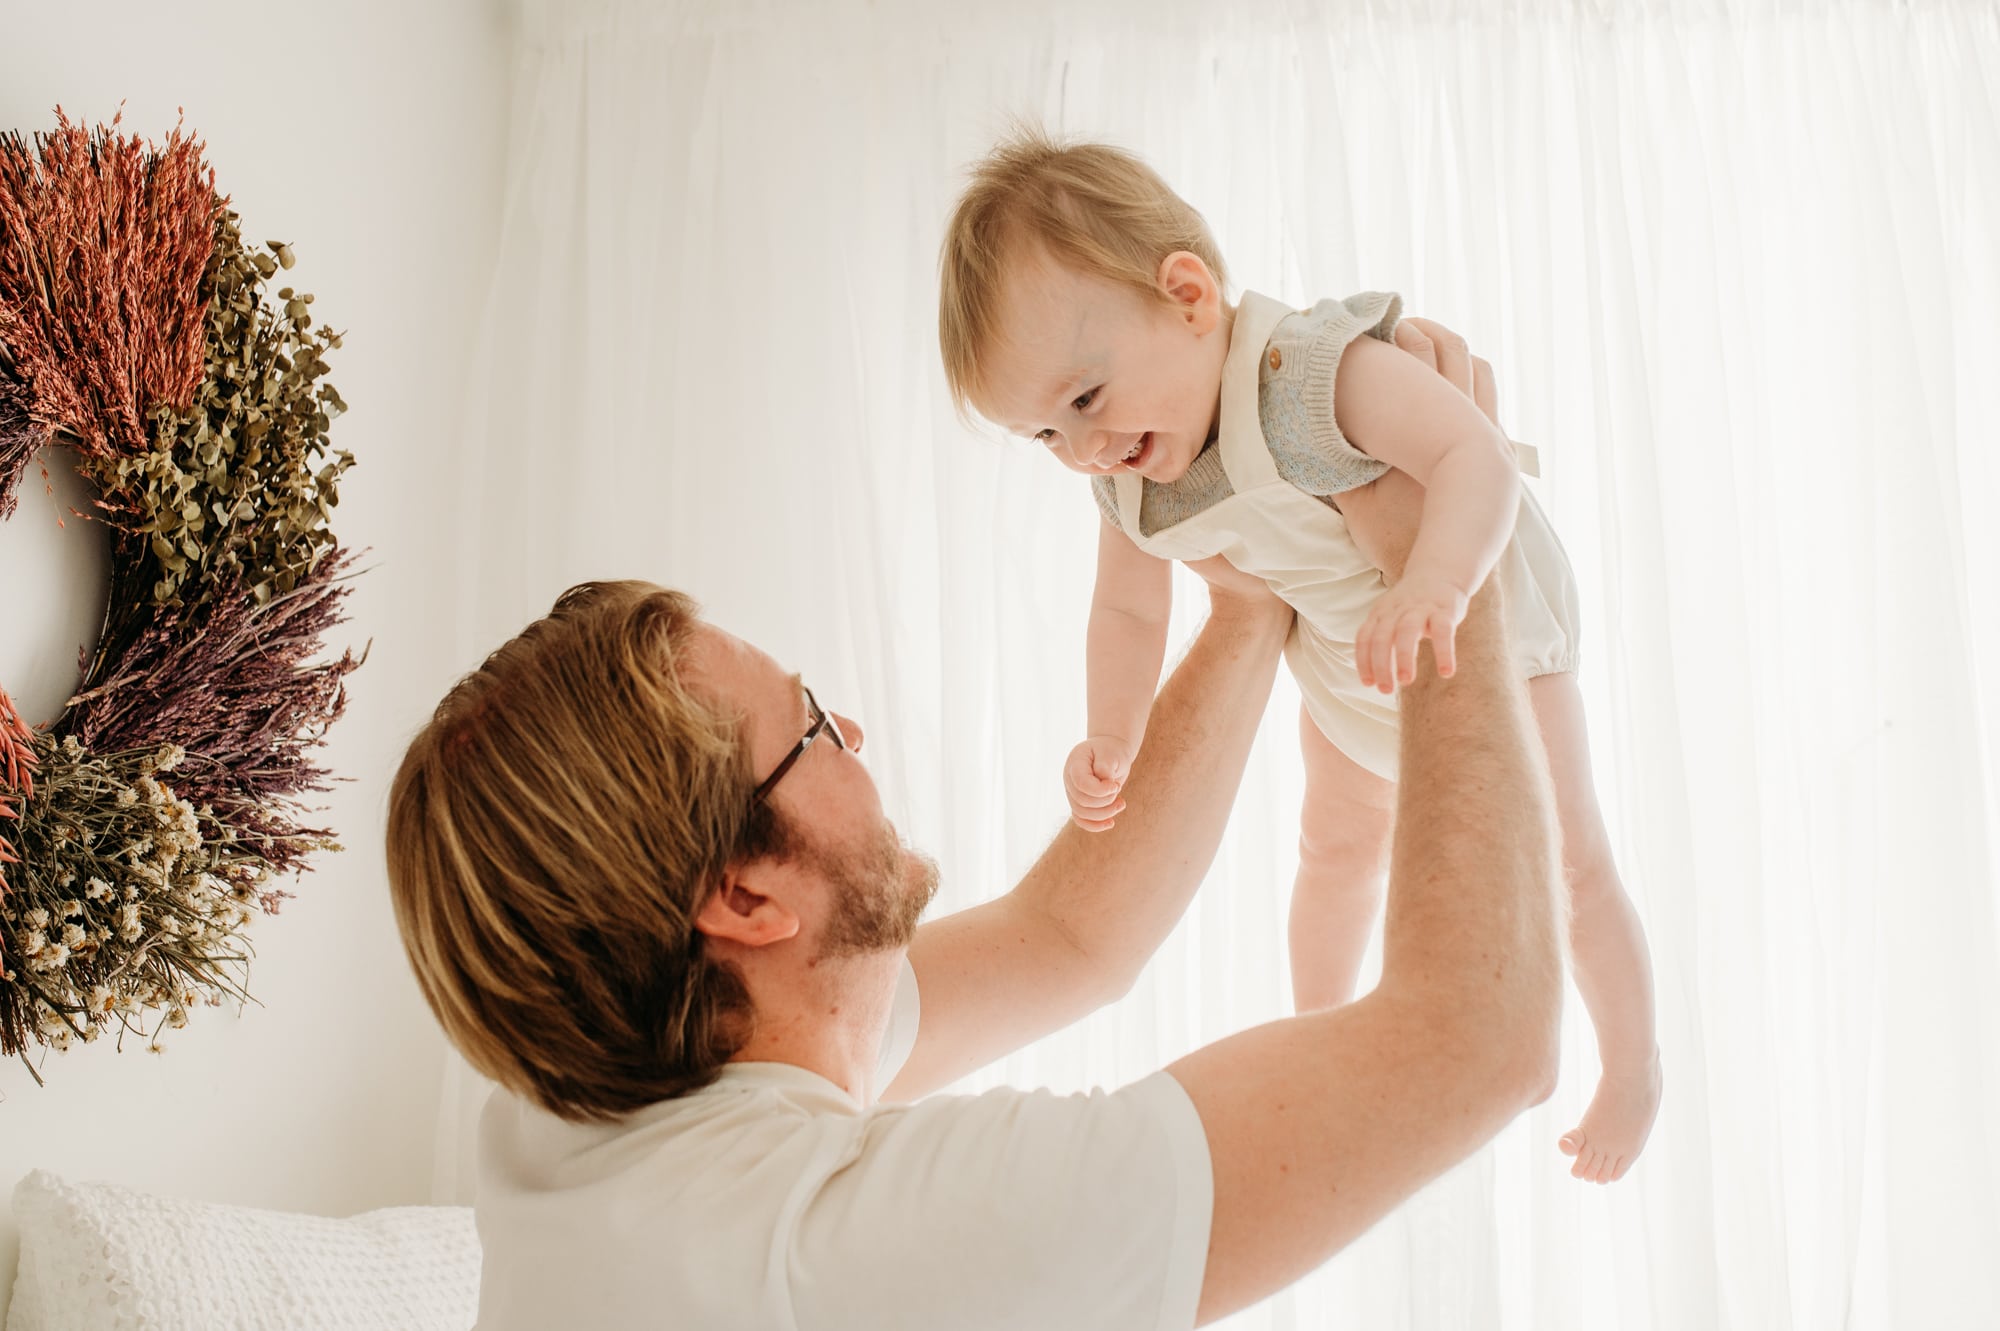 Dad lifts his baby boy into the air inside a Vancouver studio with white curtains.